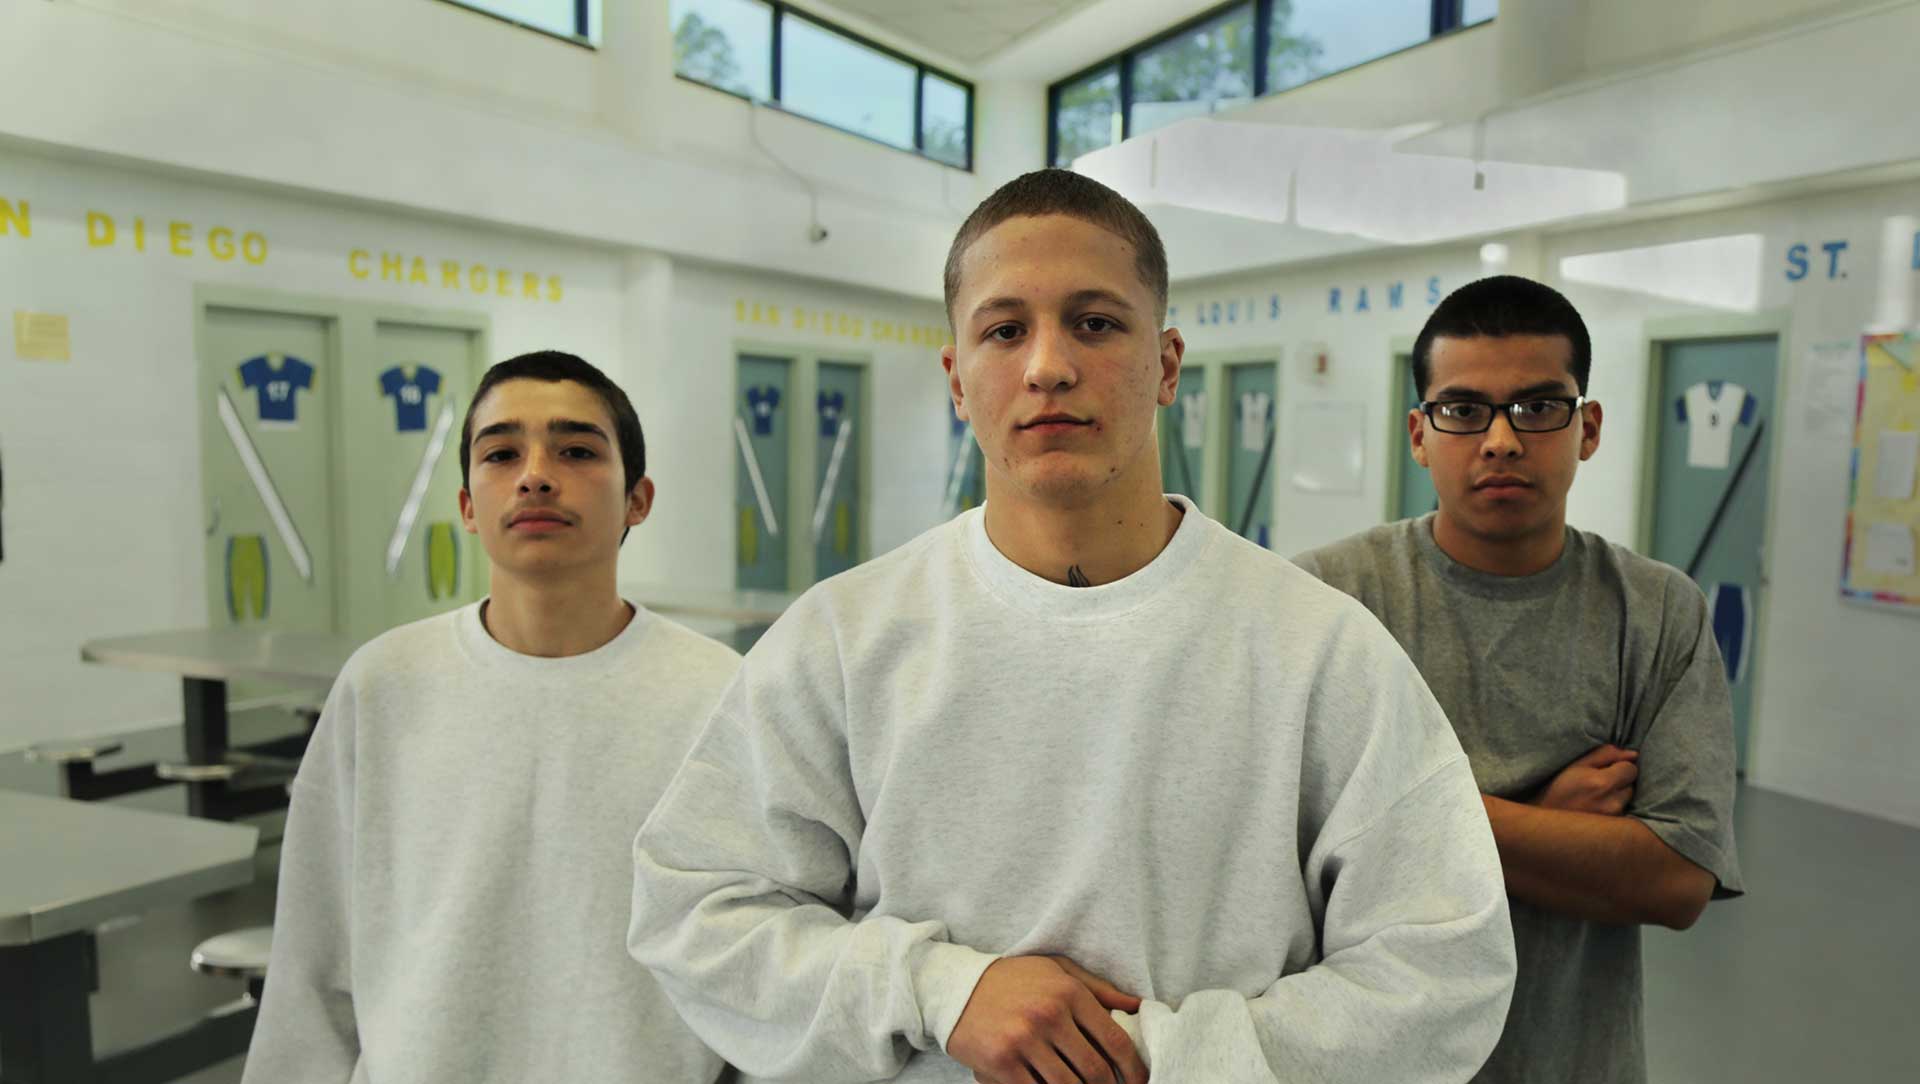 Juan, Jarad and Antonio at the Compound, a high-security Los Angeles facility for juvenile offenders.